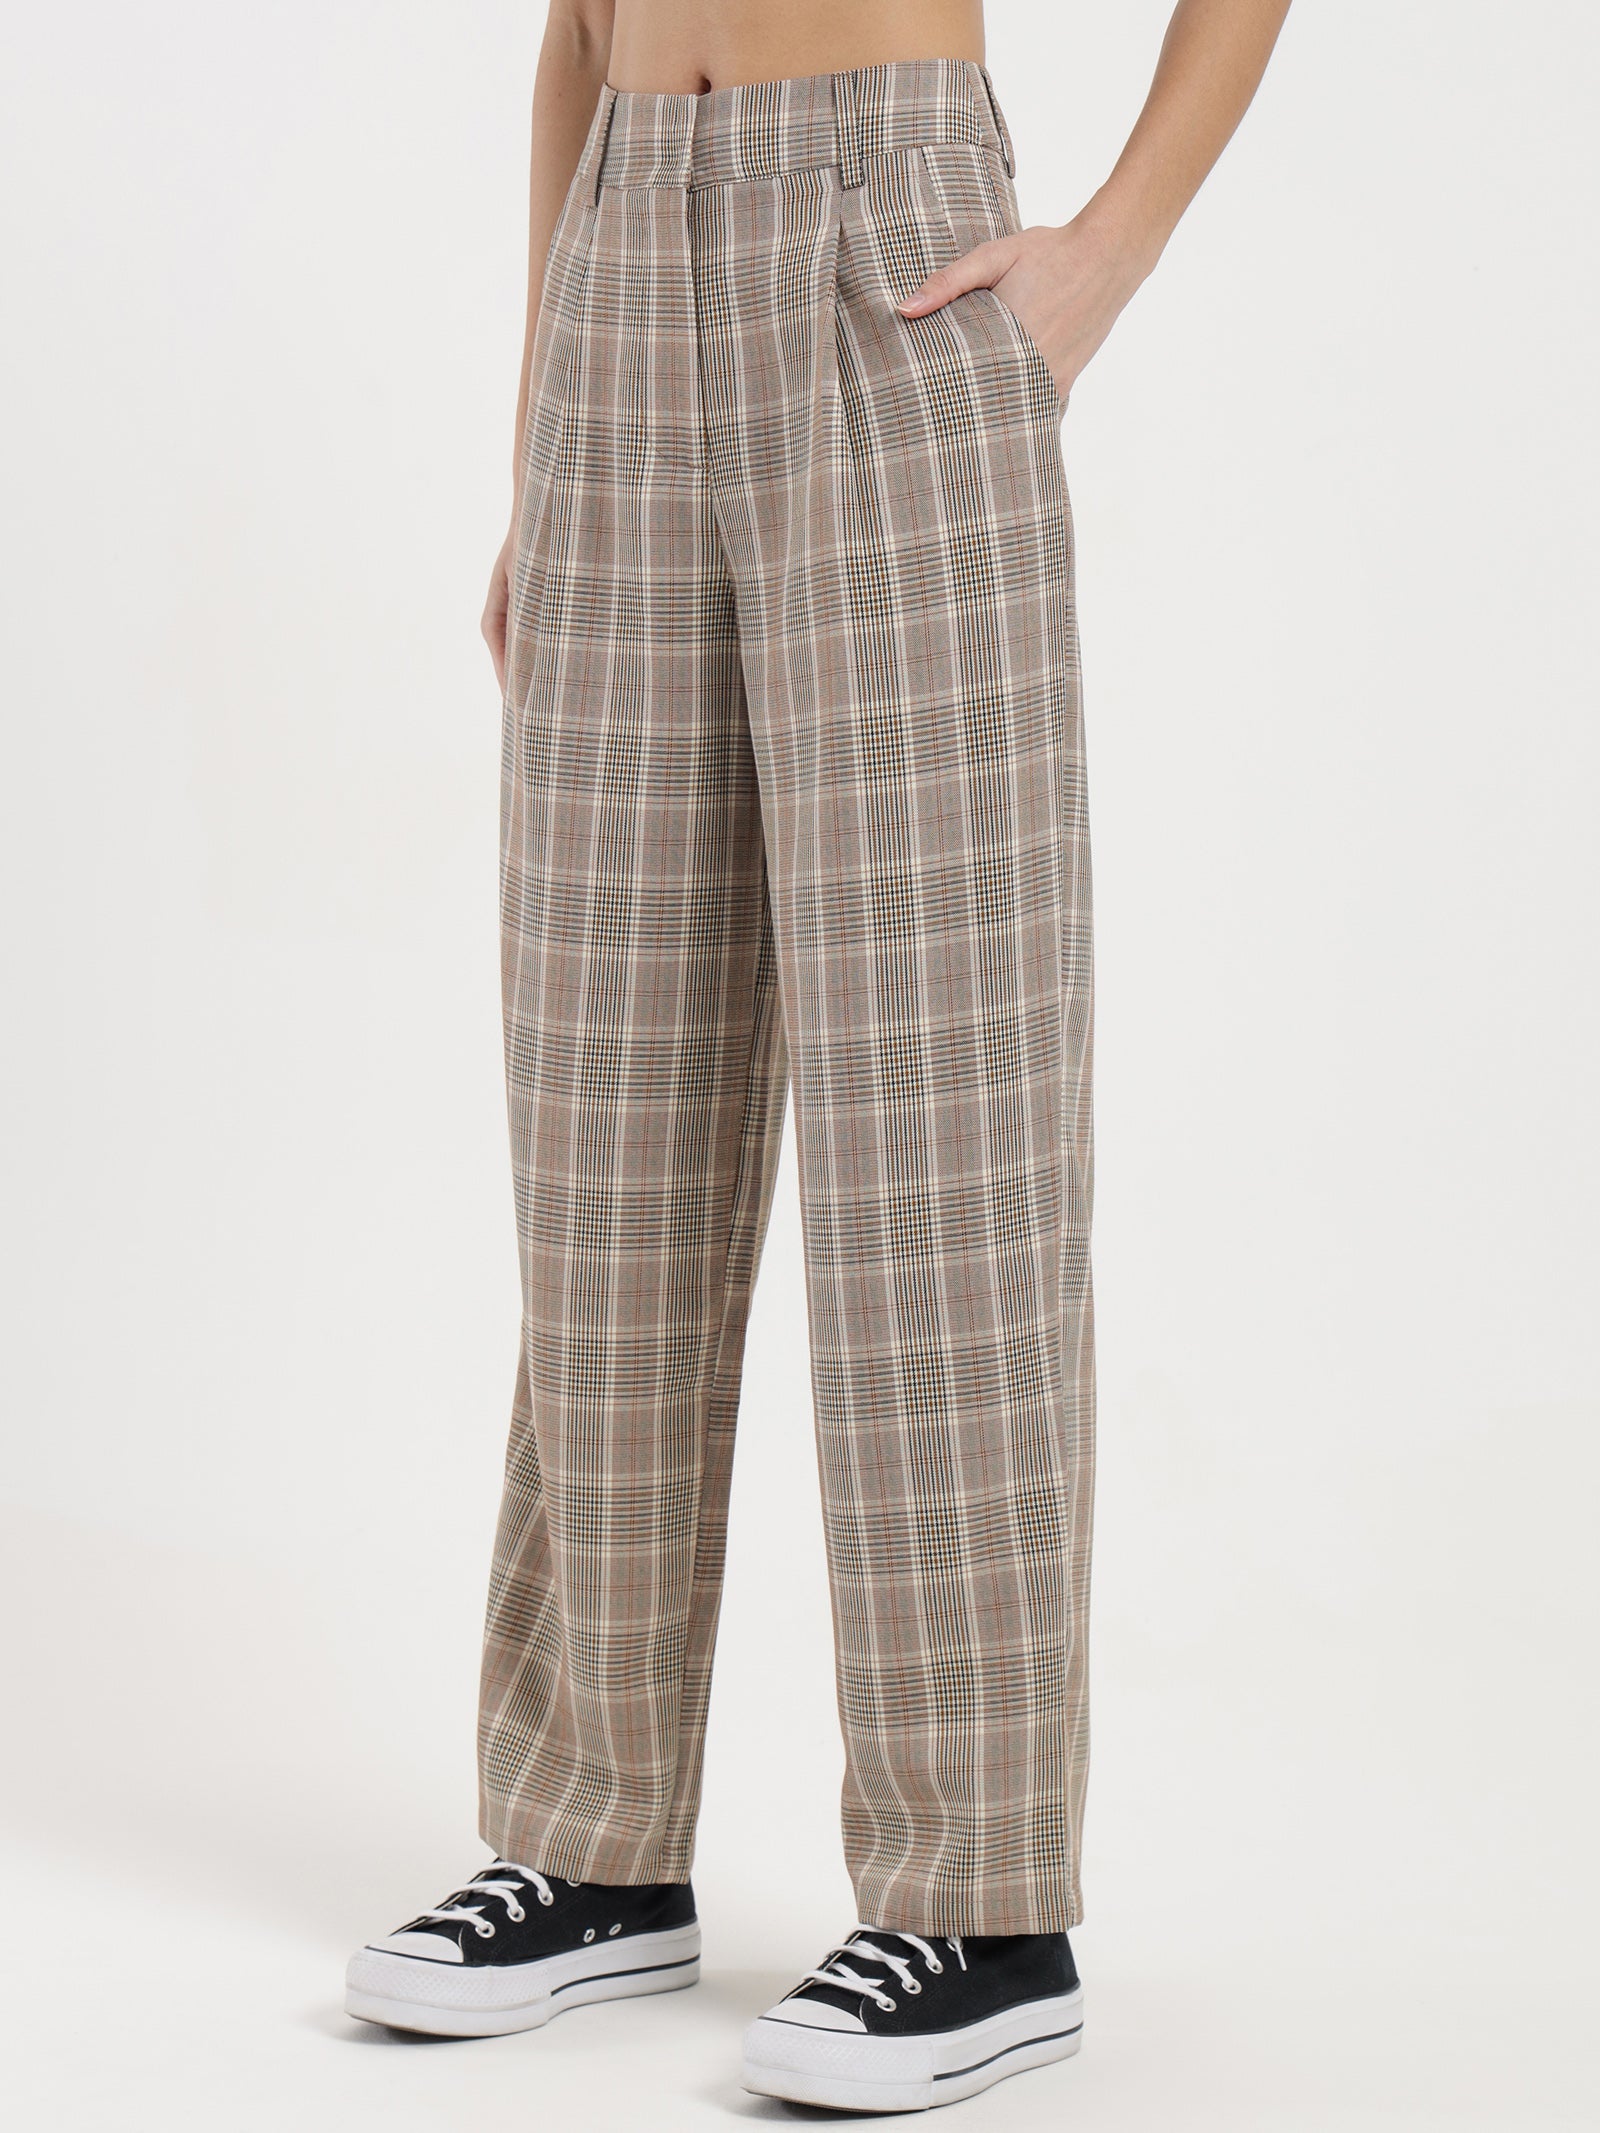 Kelly Tailored Pants in Clay Check